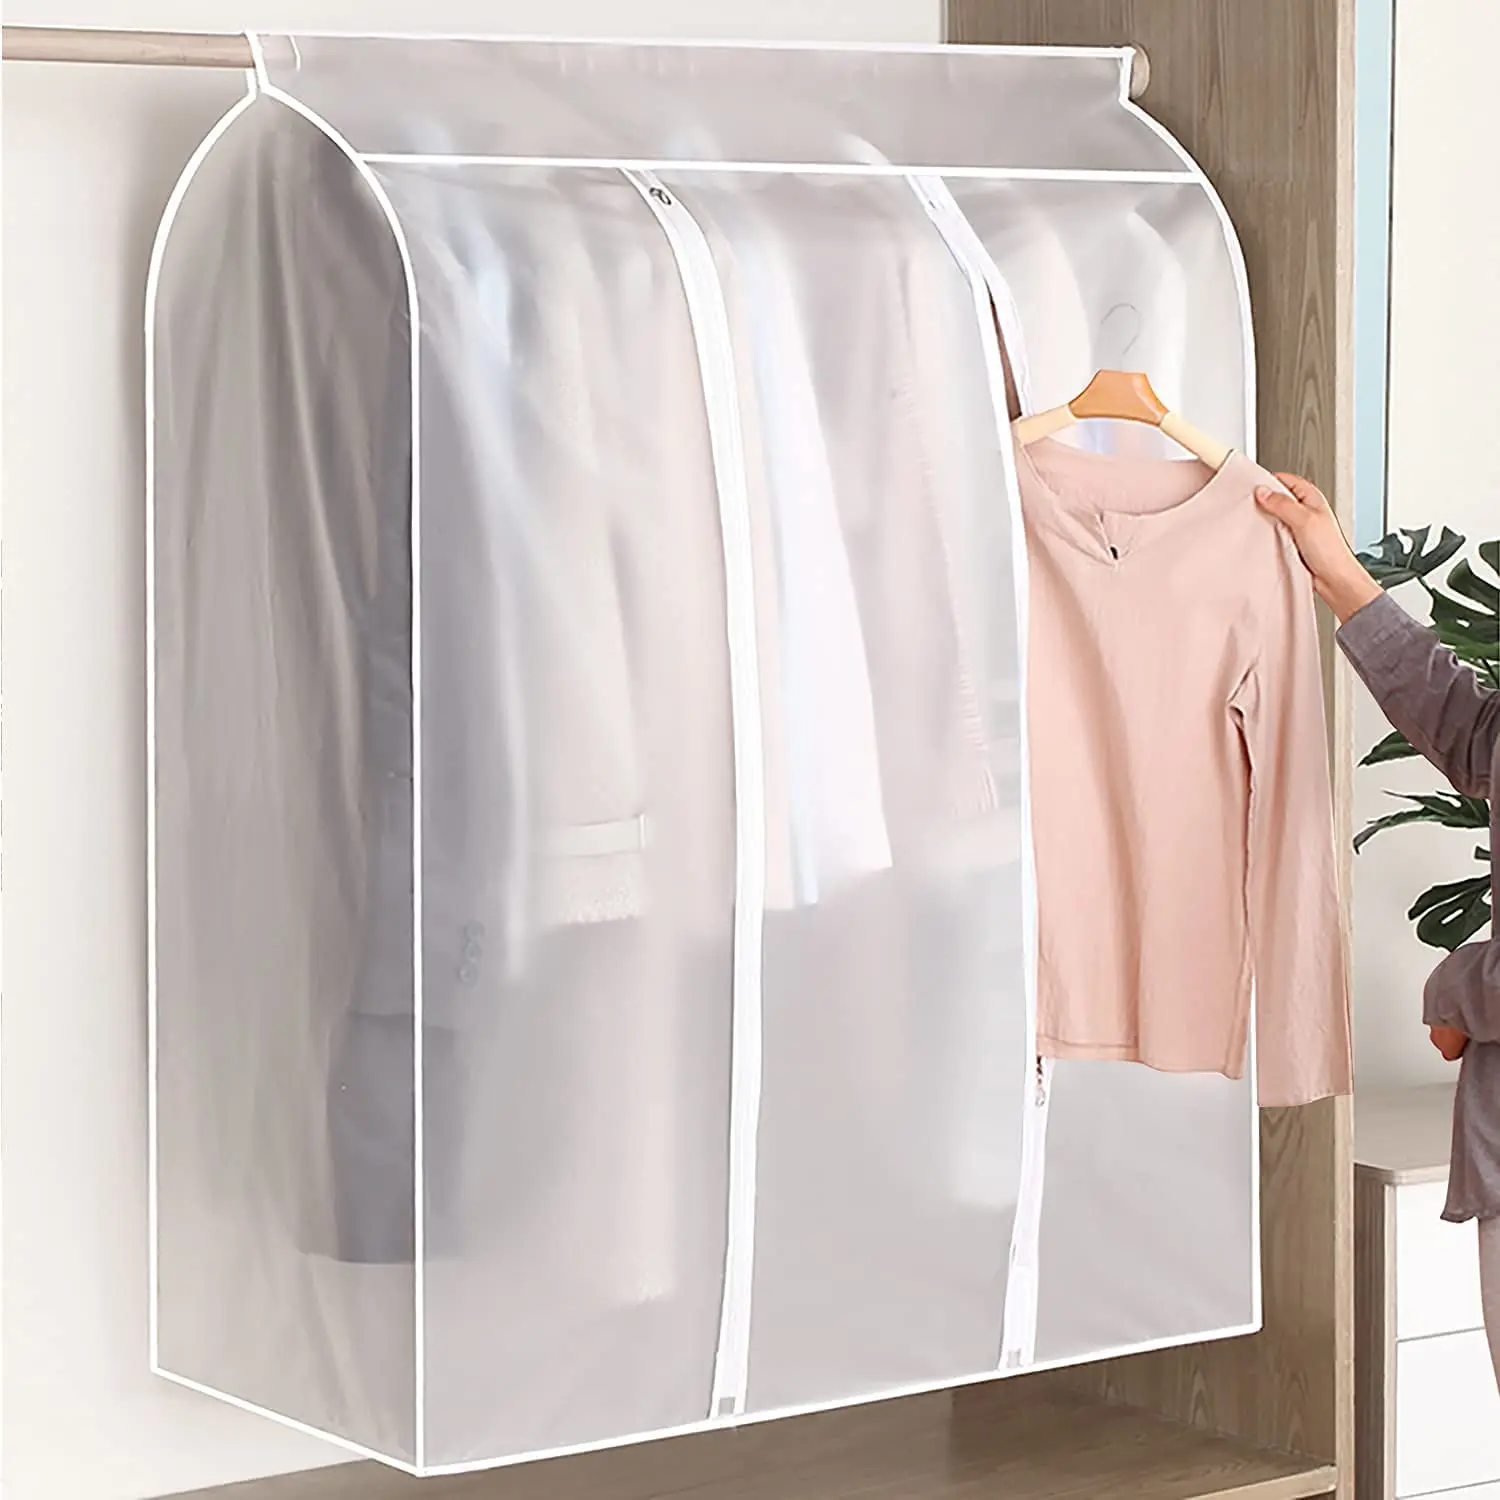 Garment Rack Cover Dustproof Waterproof Garment Bags for Hanging Clothes Clothing Storage Bag with Zipper for Hanging Shirts